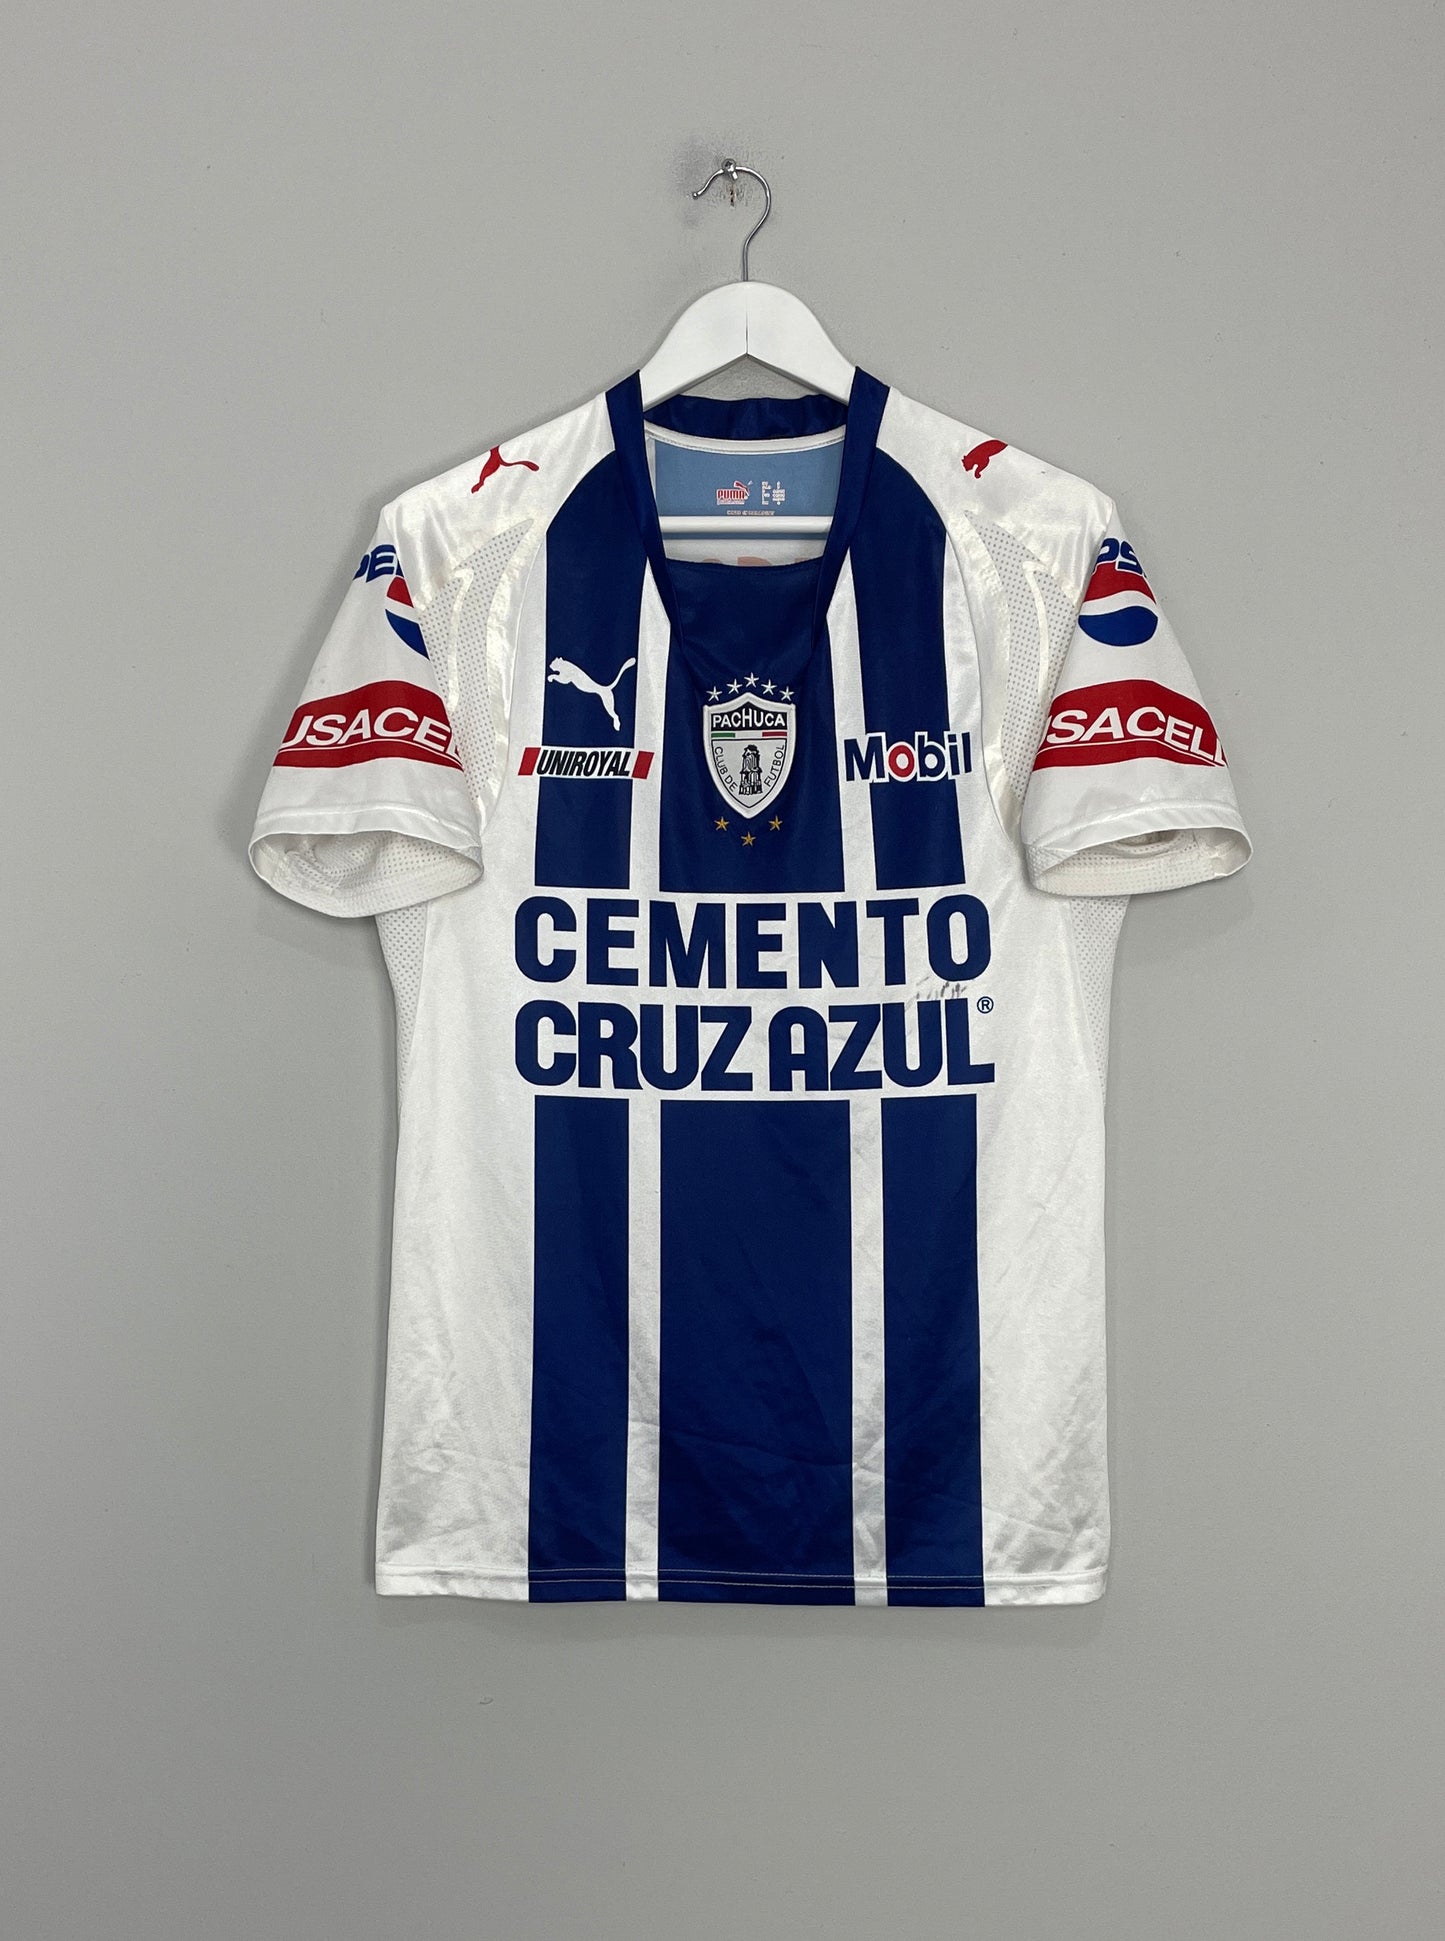 Image of the Pachuca shirt from the 2007/08 season